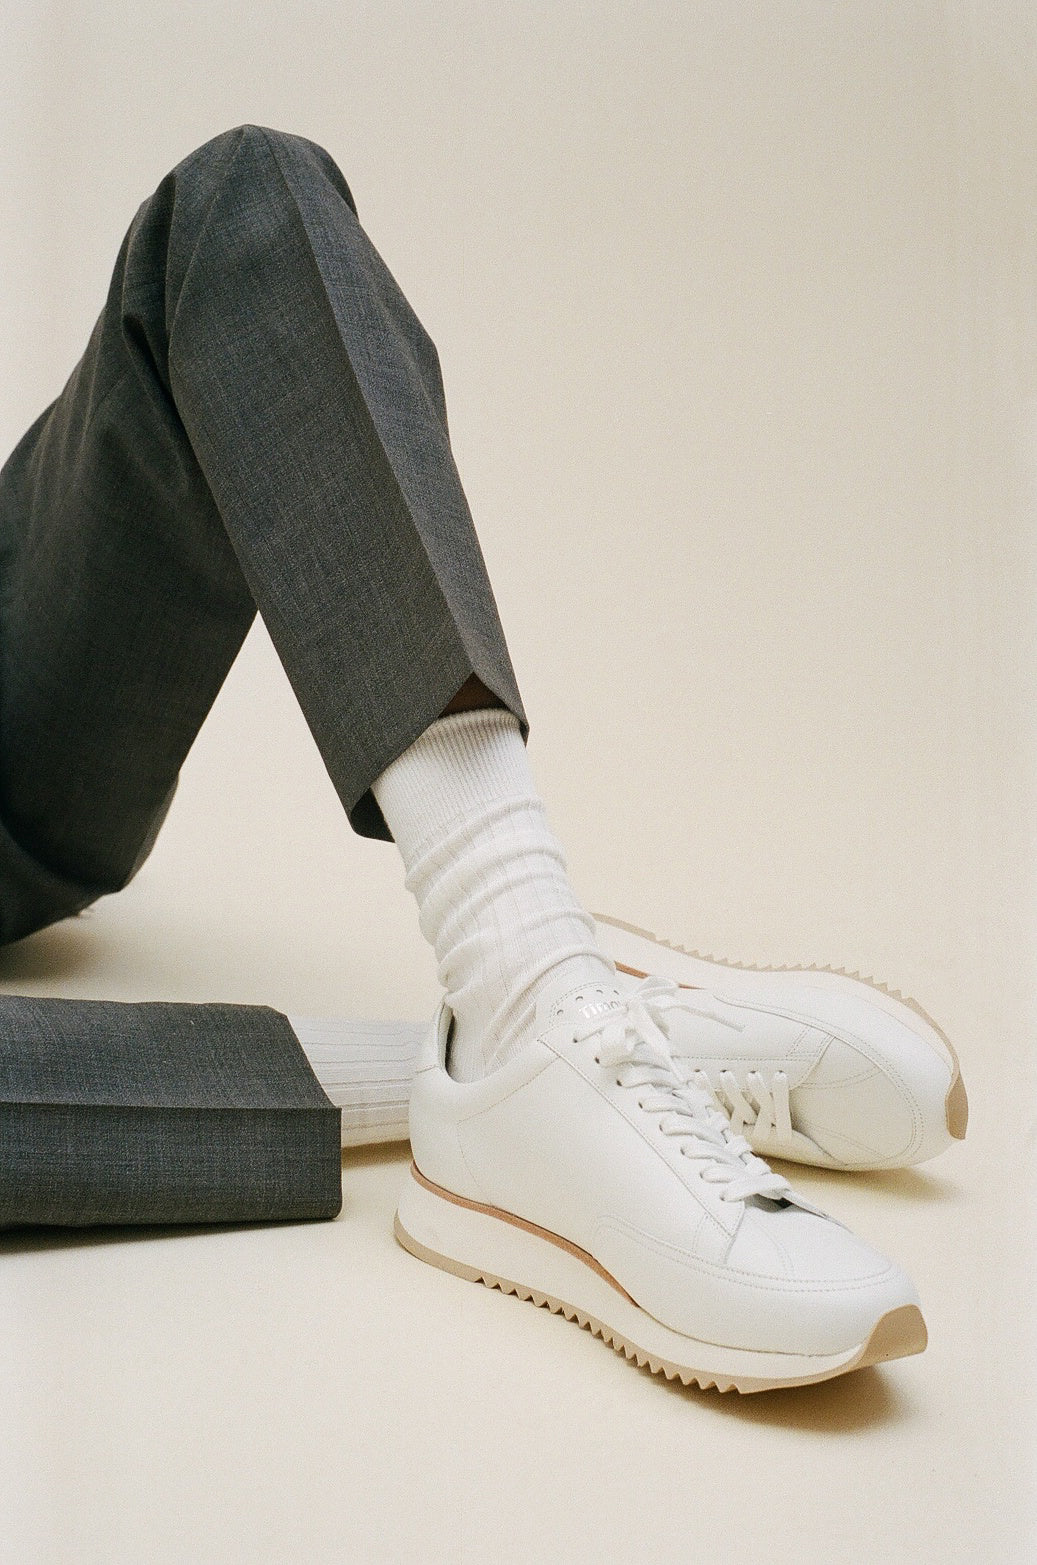 timothee-paris-sneakers-cabourg-with-sport-socks-white-nappa-leather-creme-sole